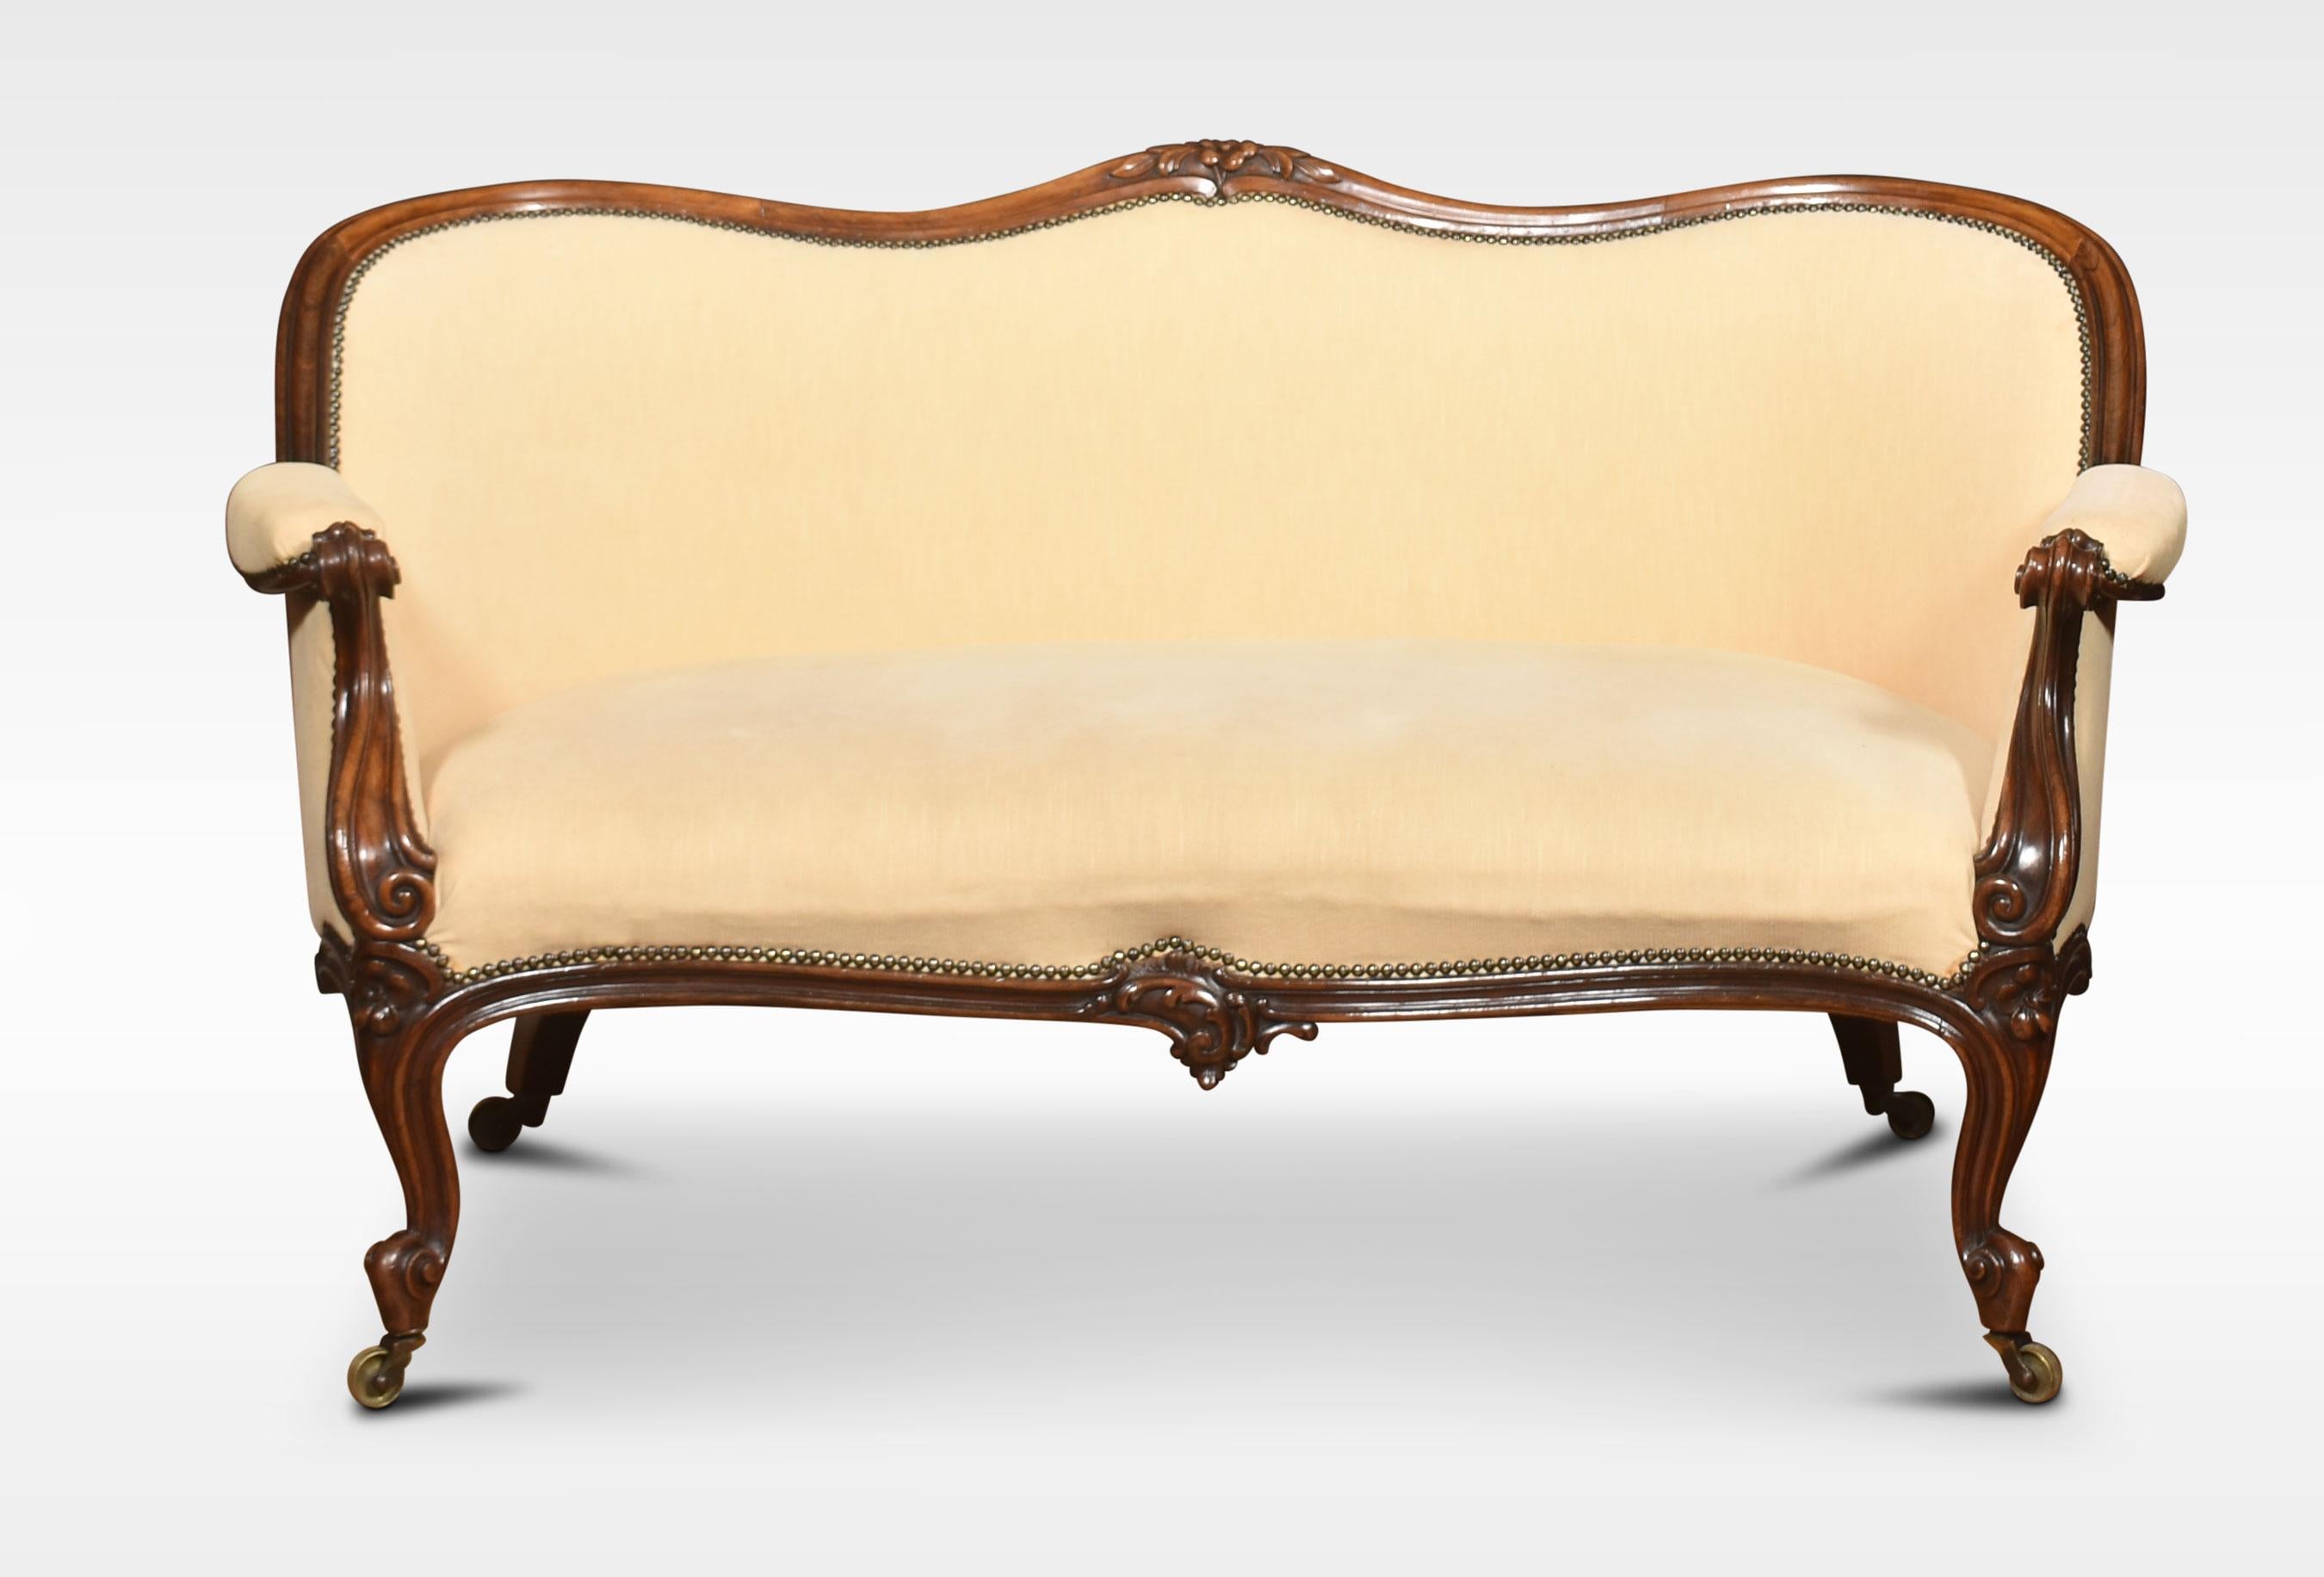 Walnut framed two-seater settee, the finely carved frame above upholstered back, seat and out swept arms. All raised up on carved cabriole legs with scrolling feet terminating in casters.
Dimensions
Height 33 Inches height to seat 17 Inches
Width